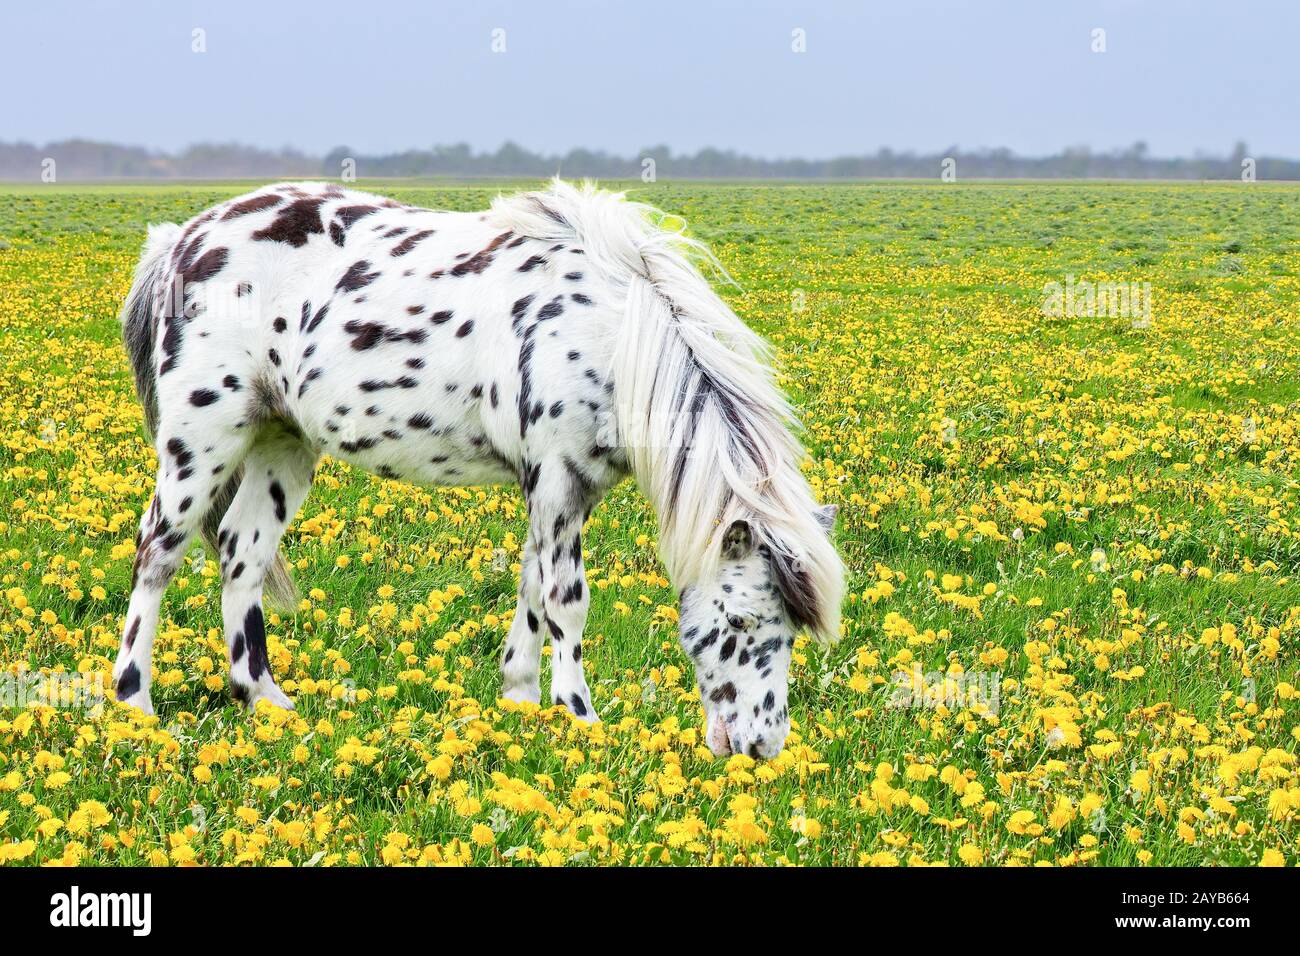 Spotted horse grazing in blooming flower meadow Stock Photo